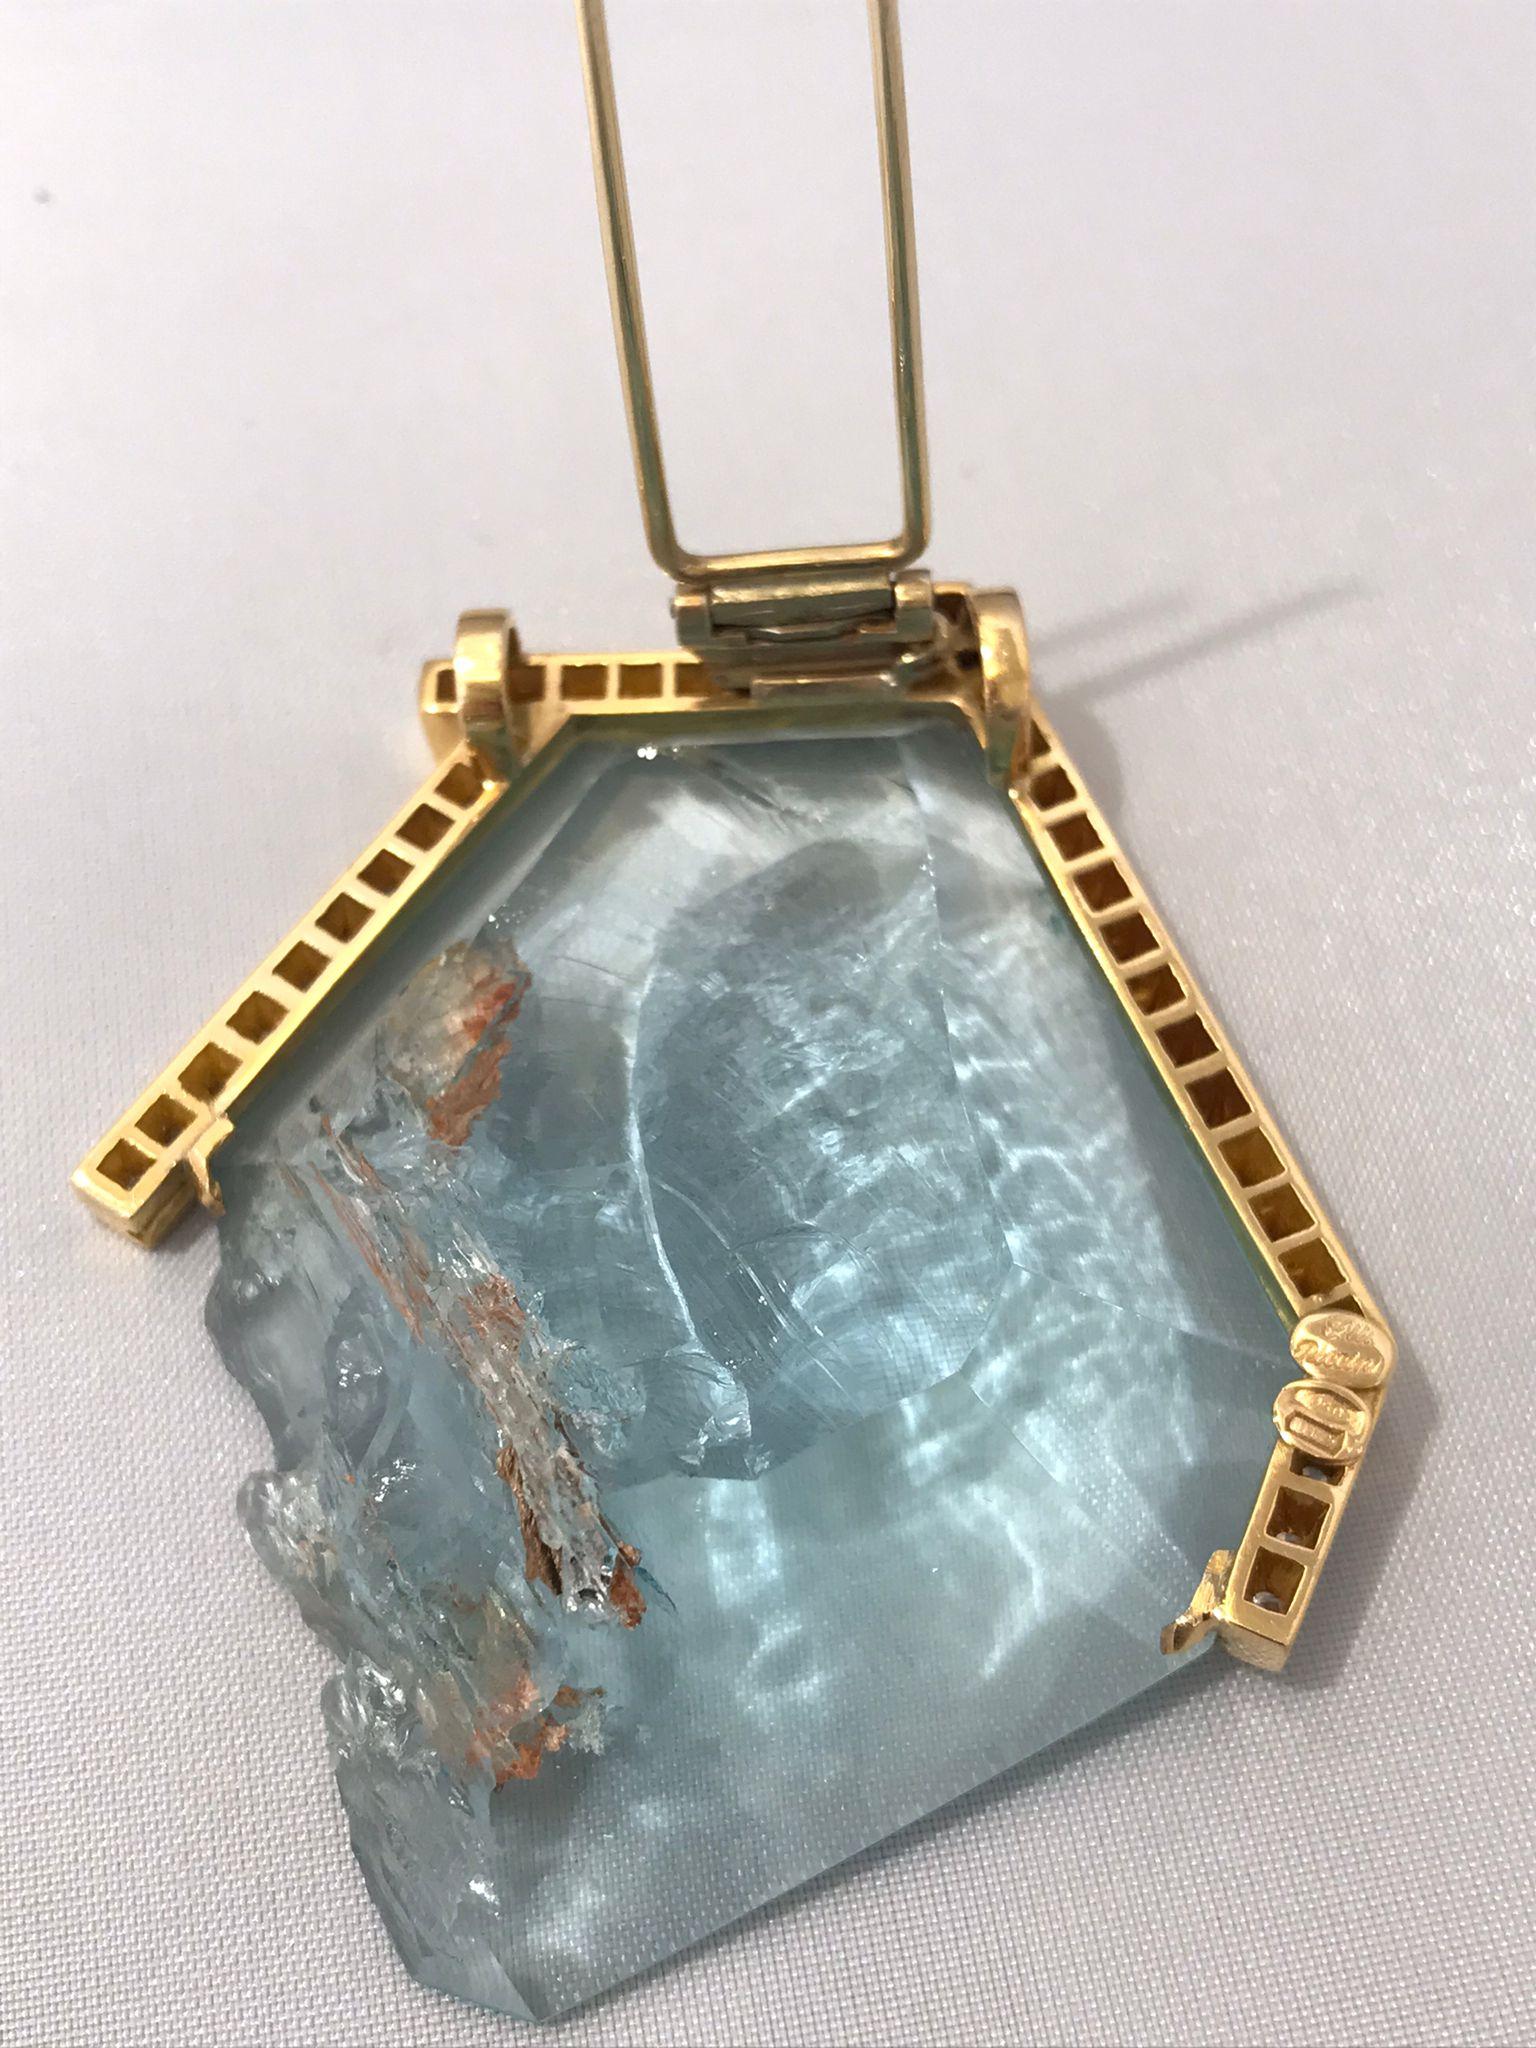 Splash. 1.45 carats of aquamarine partially faceted to leave a corner of rough crystal that enhances the naturalness of aquamarine. Framed by diamonds set in 18KT rose gold.

Thanks to the rings on the back of the setting it may be worn as a pendant